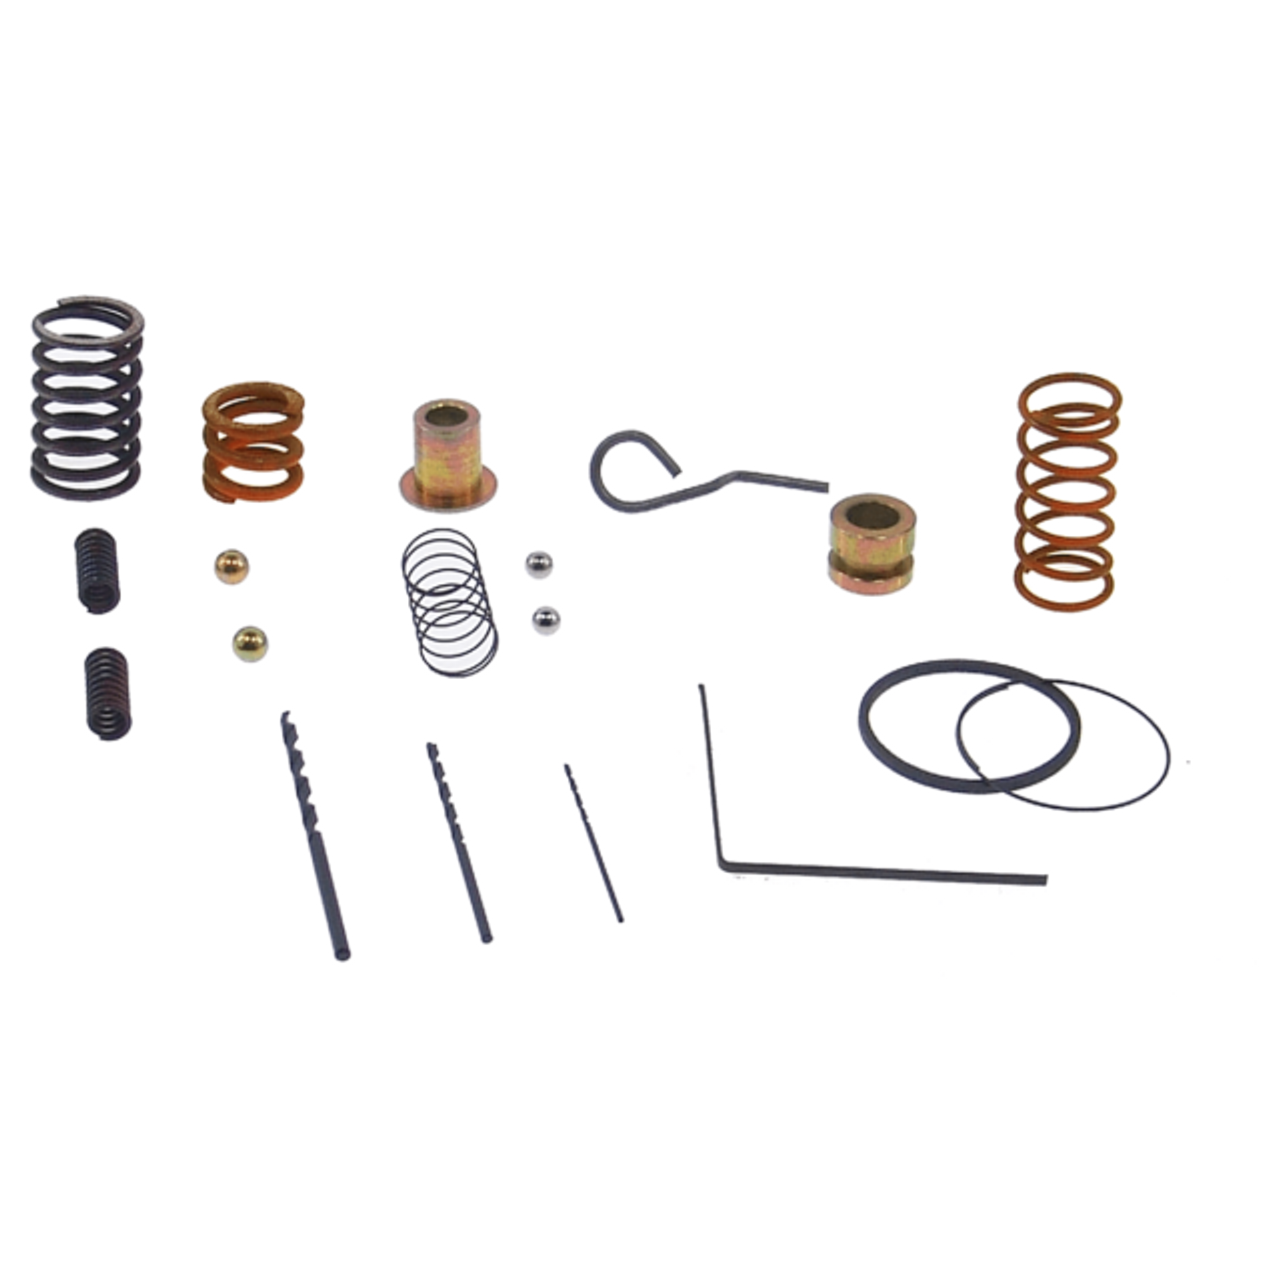 You’re going to love the shifts you get with this SHIFT KIT® Valve Body Repair Kit.
You never felt a Nissan shift this good, hot or cold!  Short, smooth, shifts with no bangs